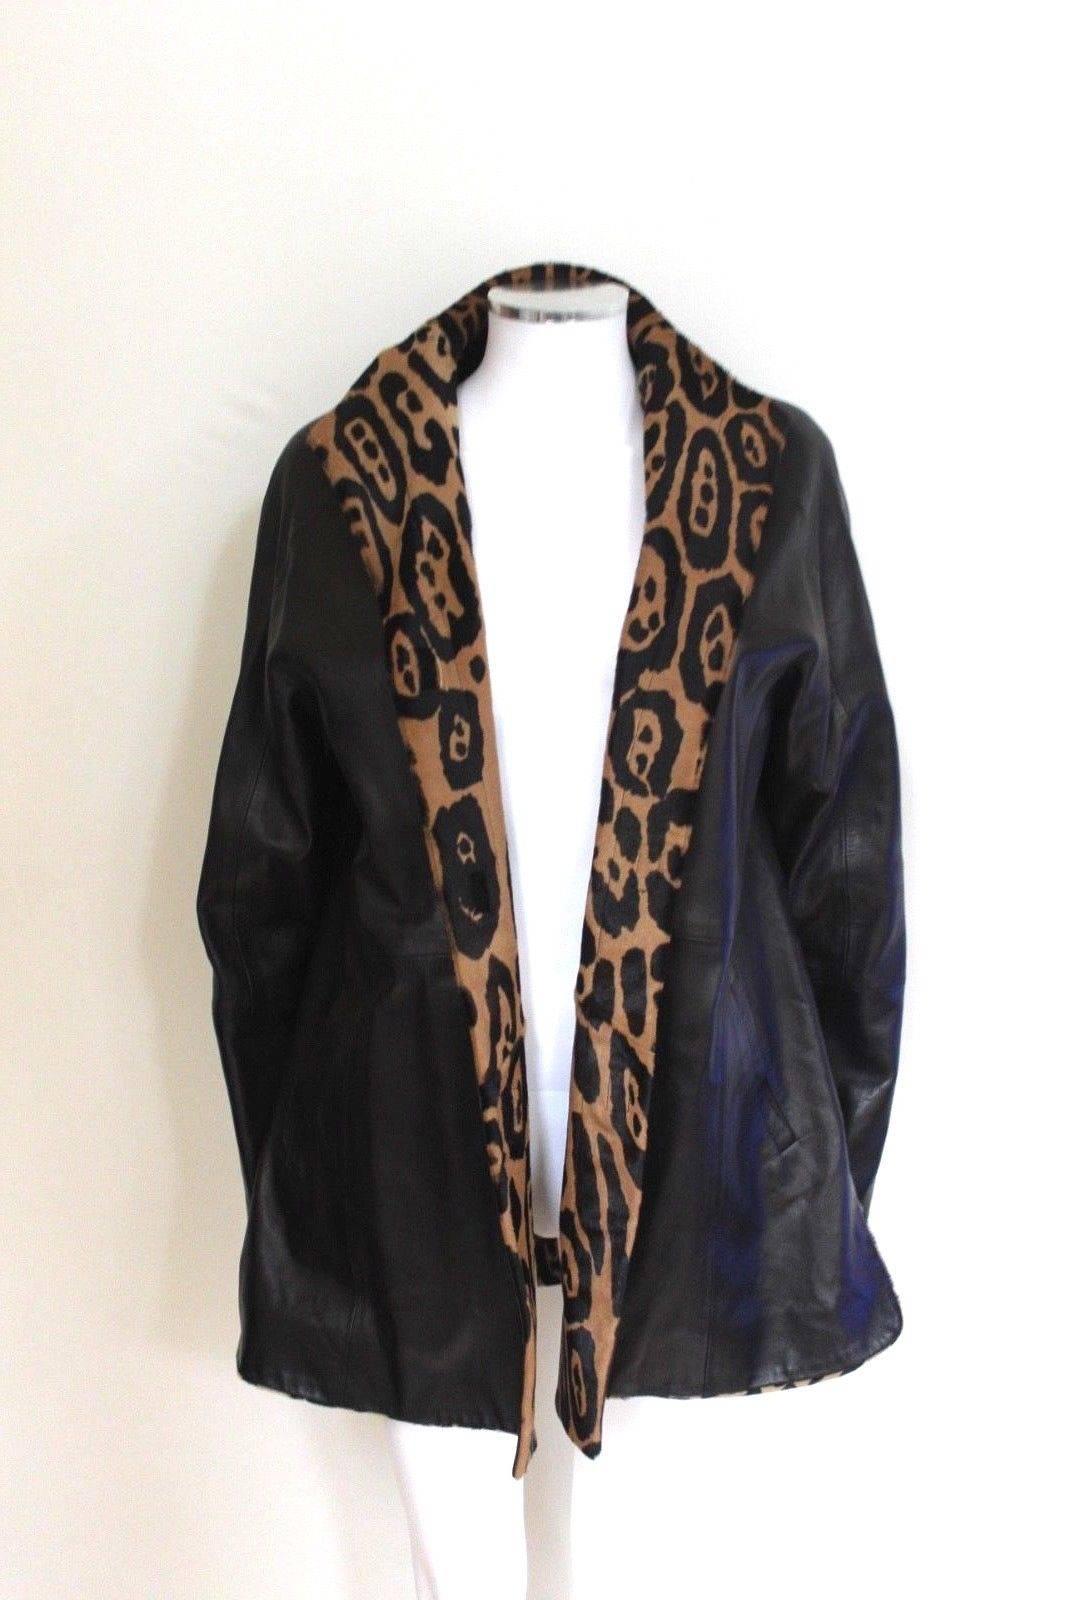 Jitrois Black Leather Leopard Fur Trim Jacket 40 uk 12
Black leather jacket with velcro fastening 
 Swing style coat, fully lined 
Length 30 inches, chest 20 inches across laid flat.
Excellent condition, a few small scratches to the side as seen in